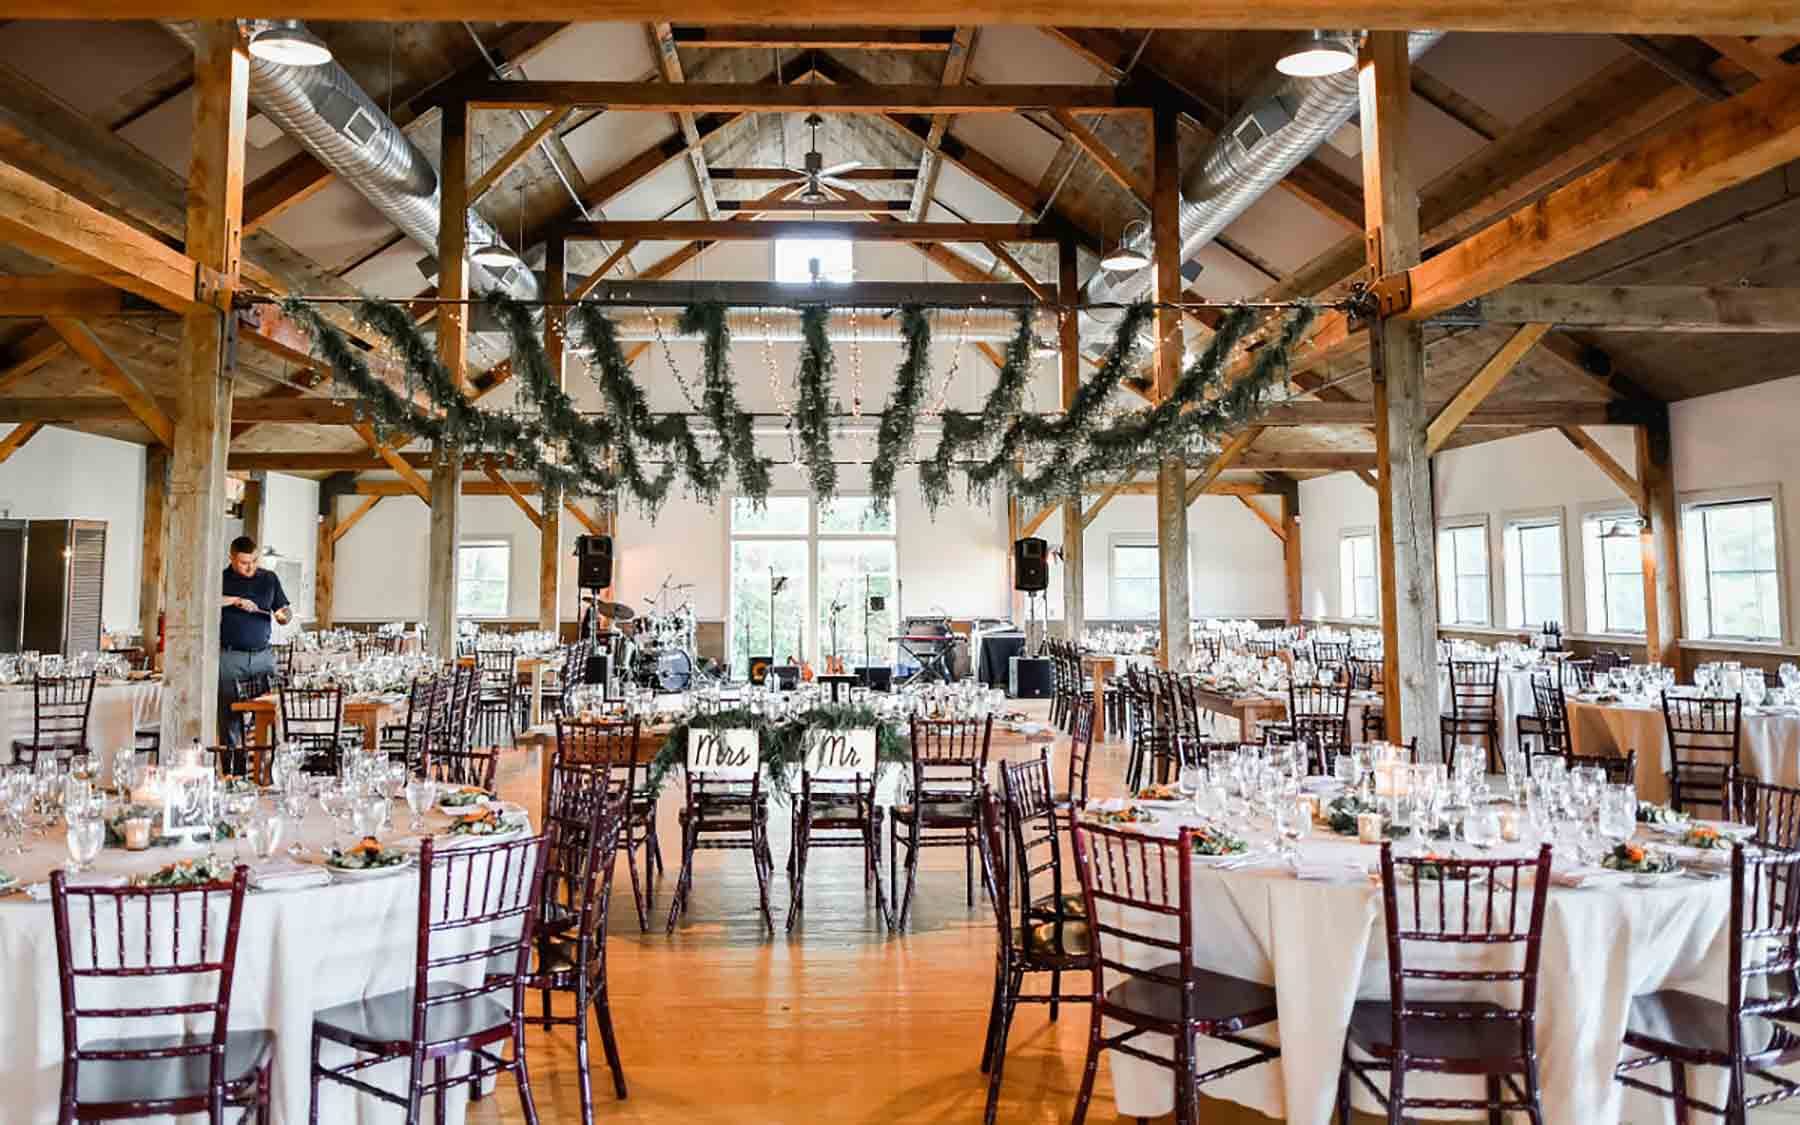 interior of barn decorated for wedding reception